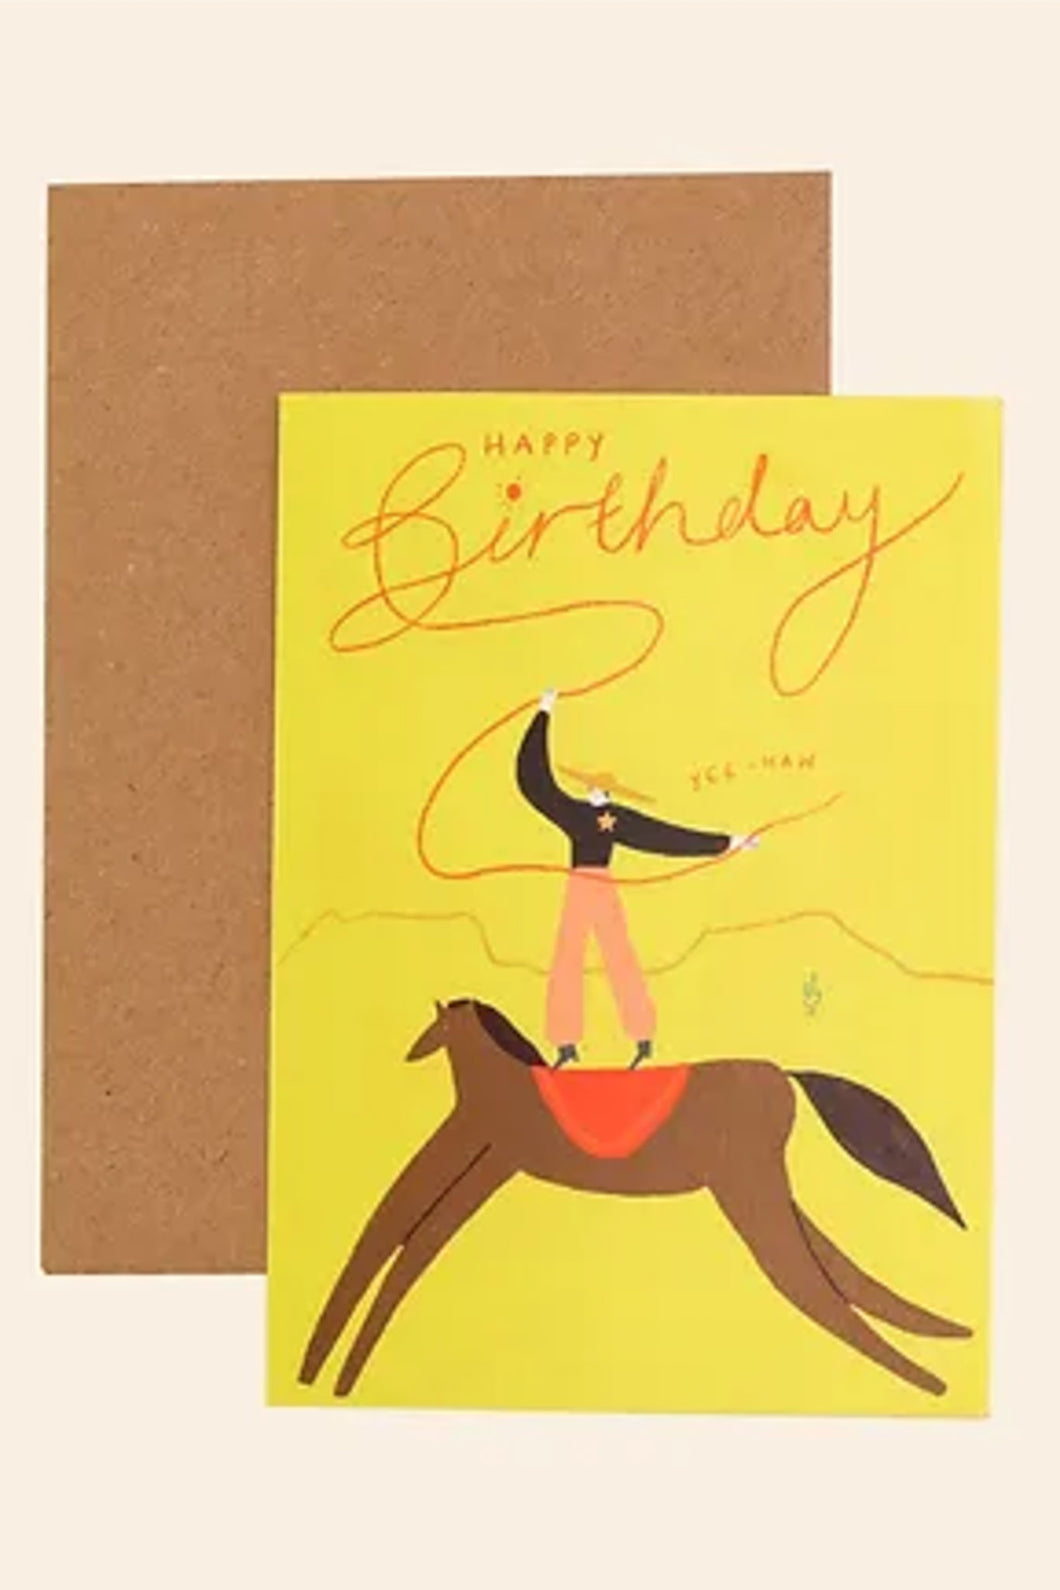 Happy Birthday Card with cowboy standing on horse with lasso